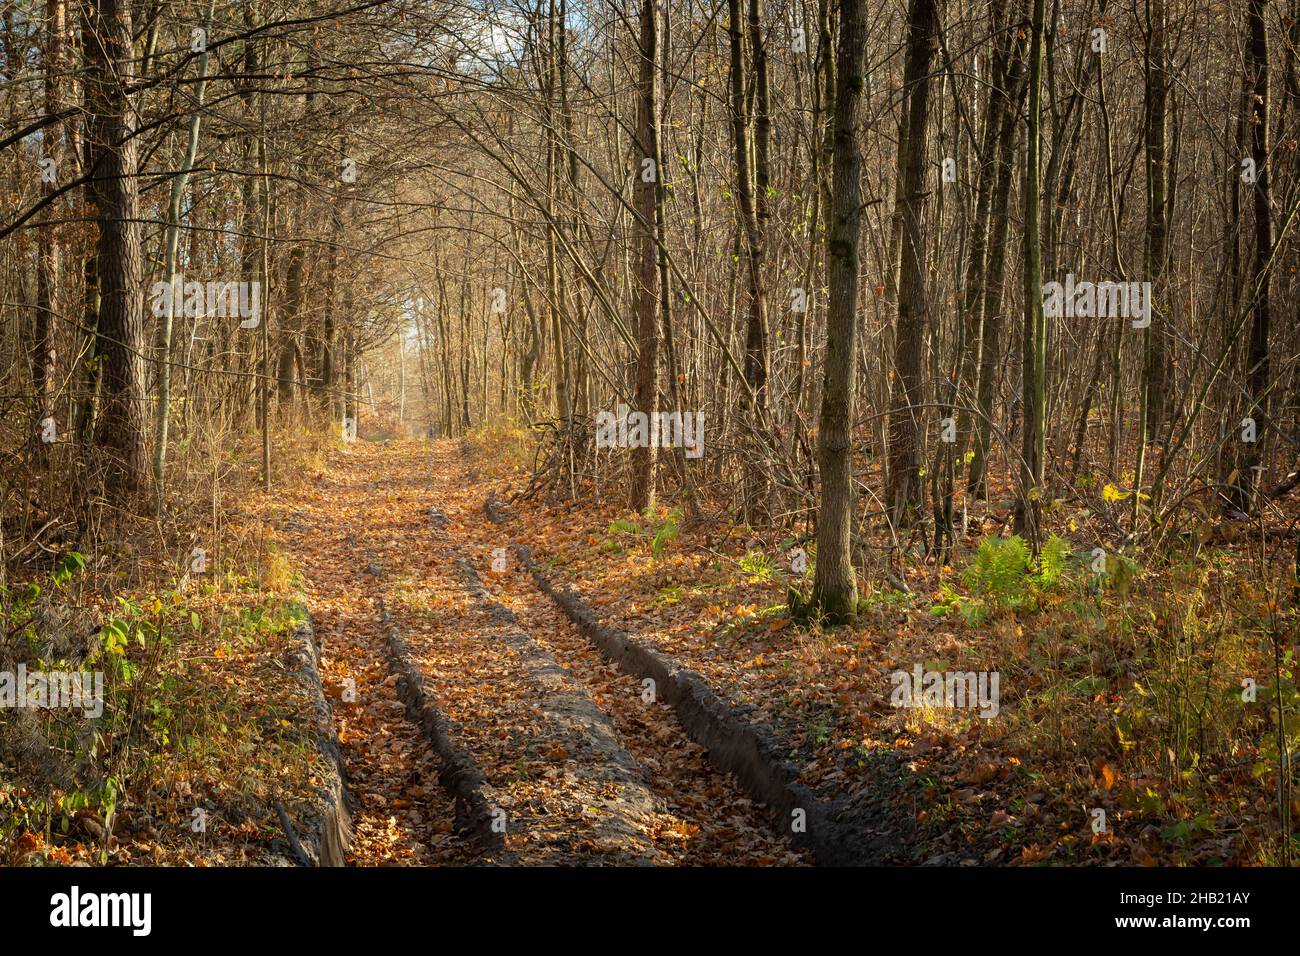 A dirt road through the autumn forest, sunny november day Stock Photo